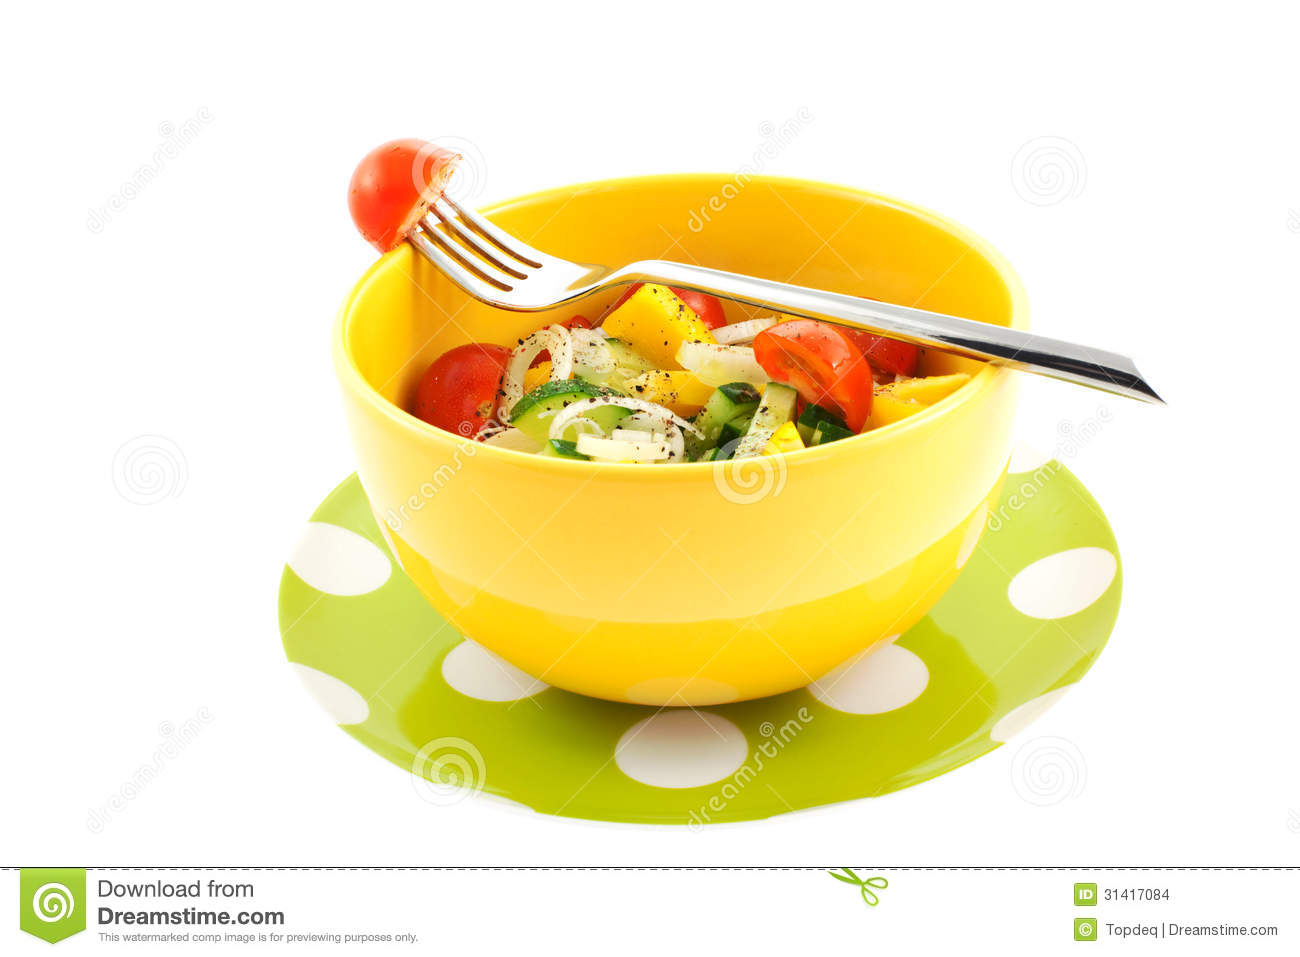 Vegetable Salad In A Yellow Bowl And Fork With Tomato Isolated On A    